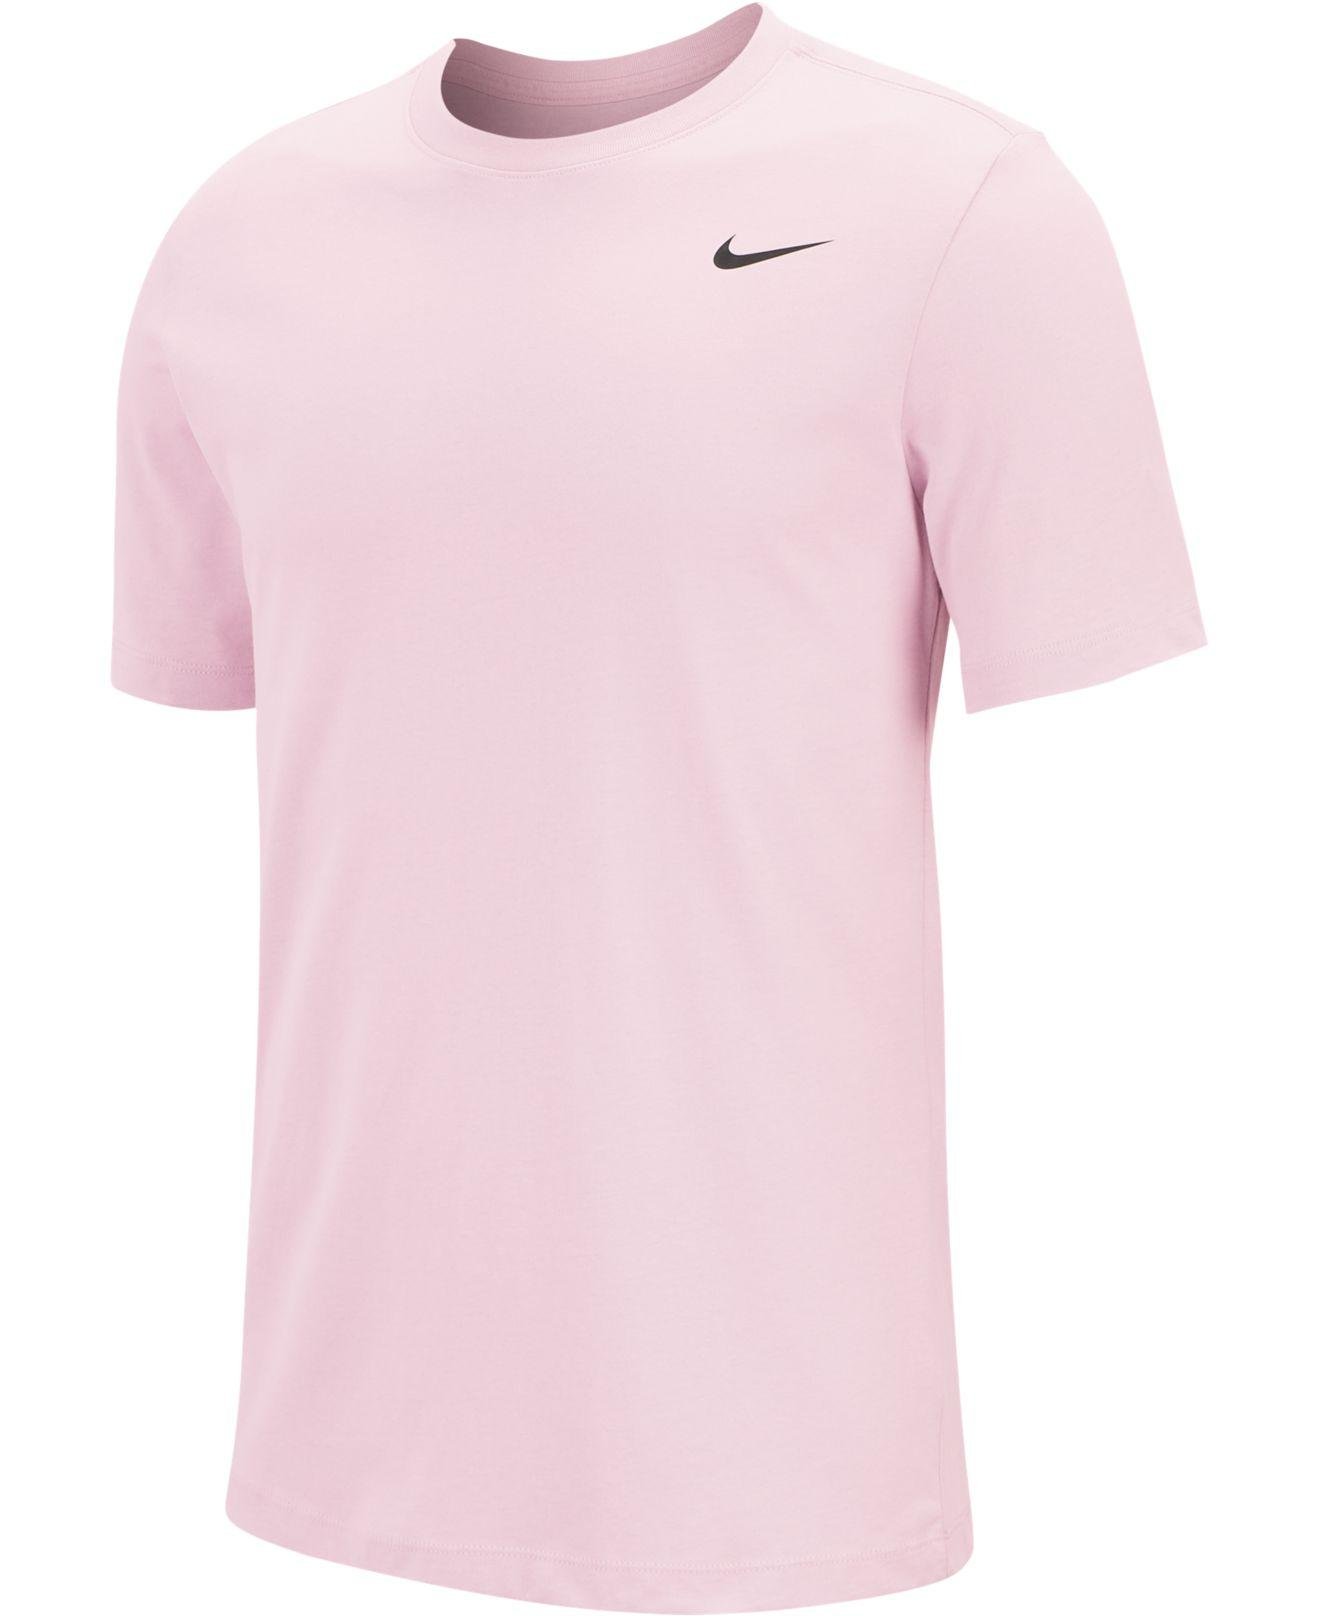 Nike Dri-fit Training T-shirt in Pink for Men - Save 36% - Lyst